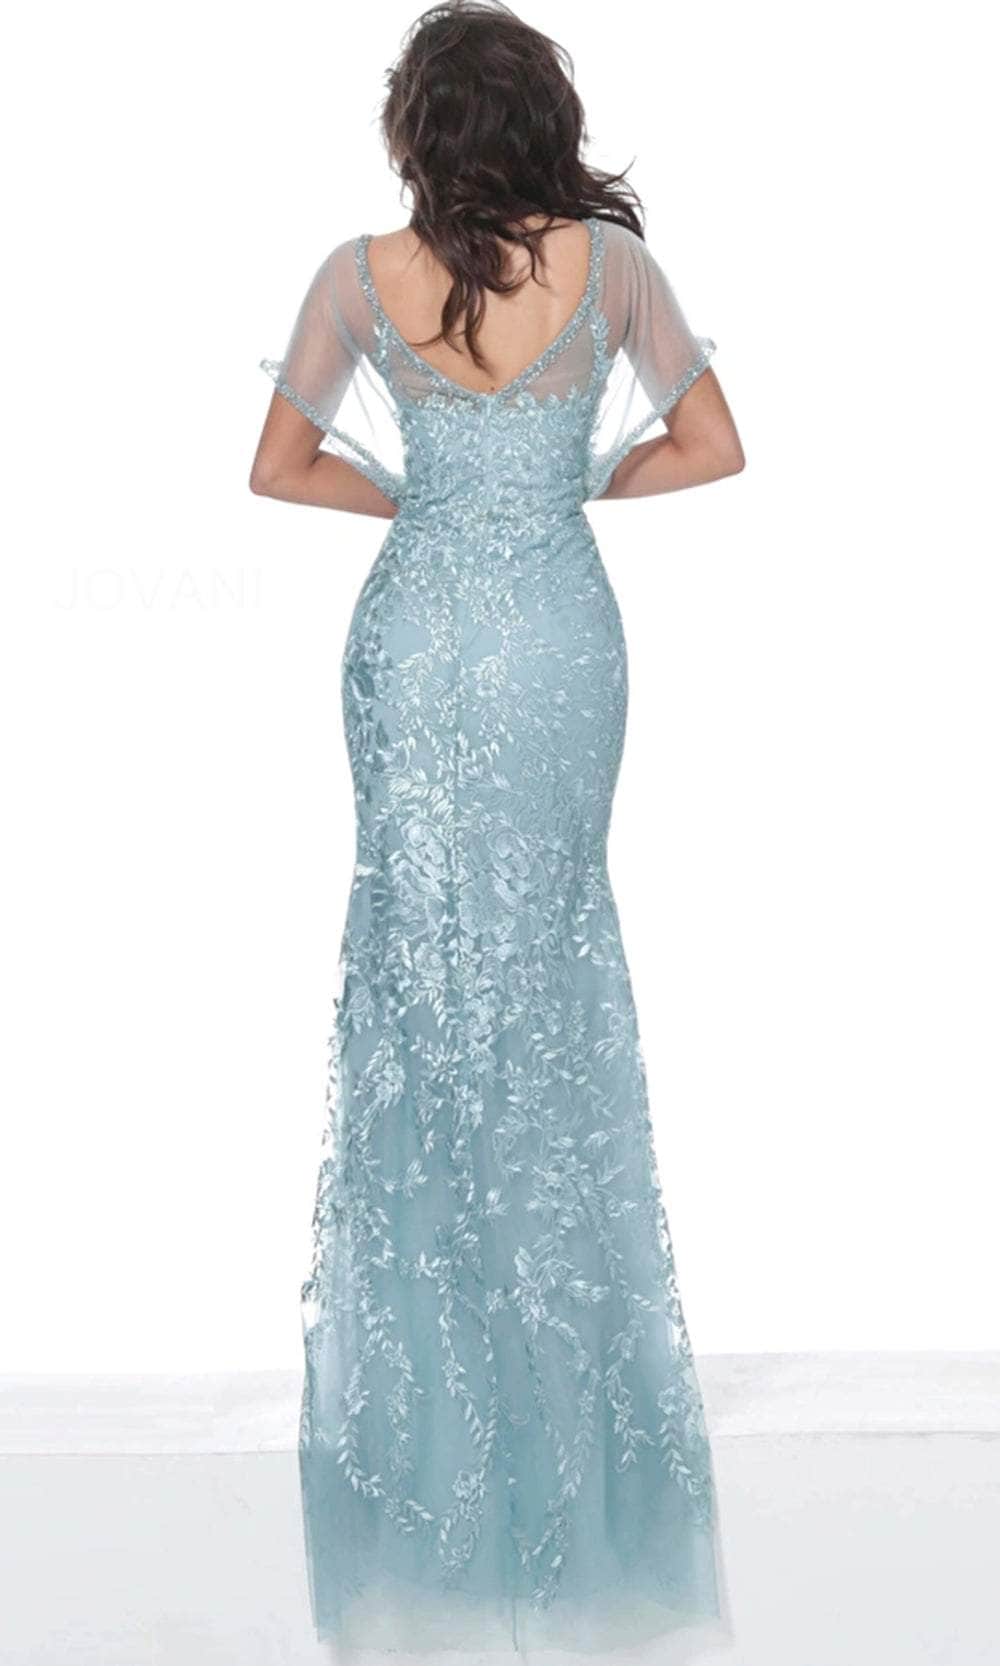 Jovani 04458 - Embroidered Illusion Formal Dress Mother of the Bride Dresses